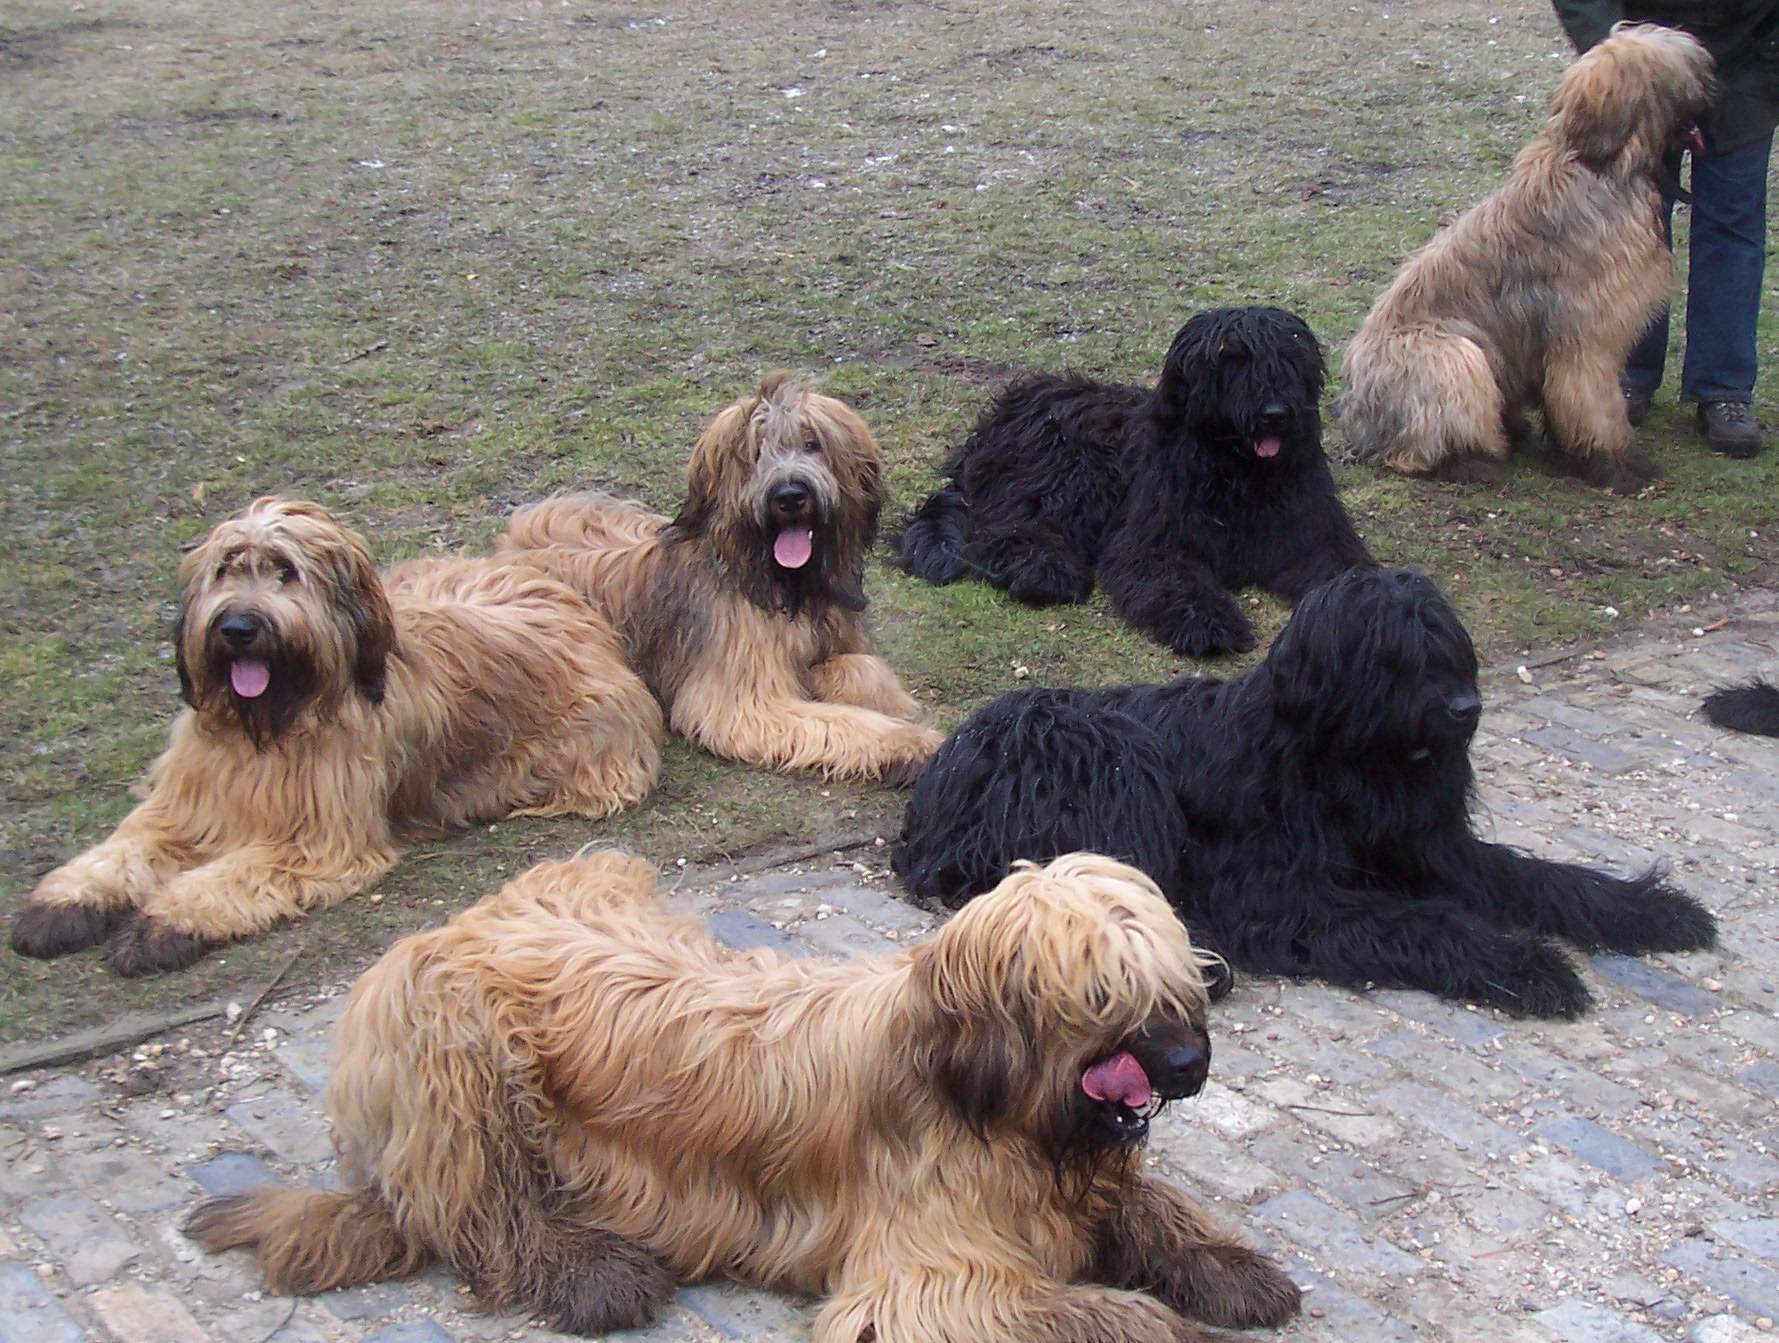 Group of Briard dogs wallpaper